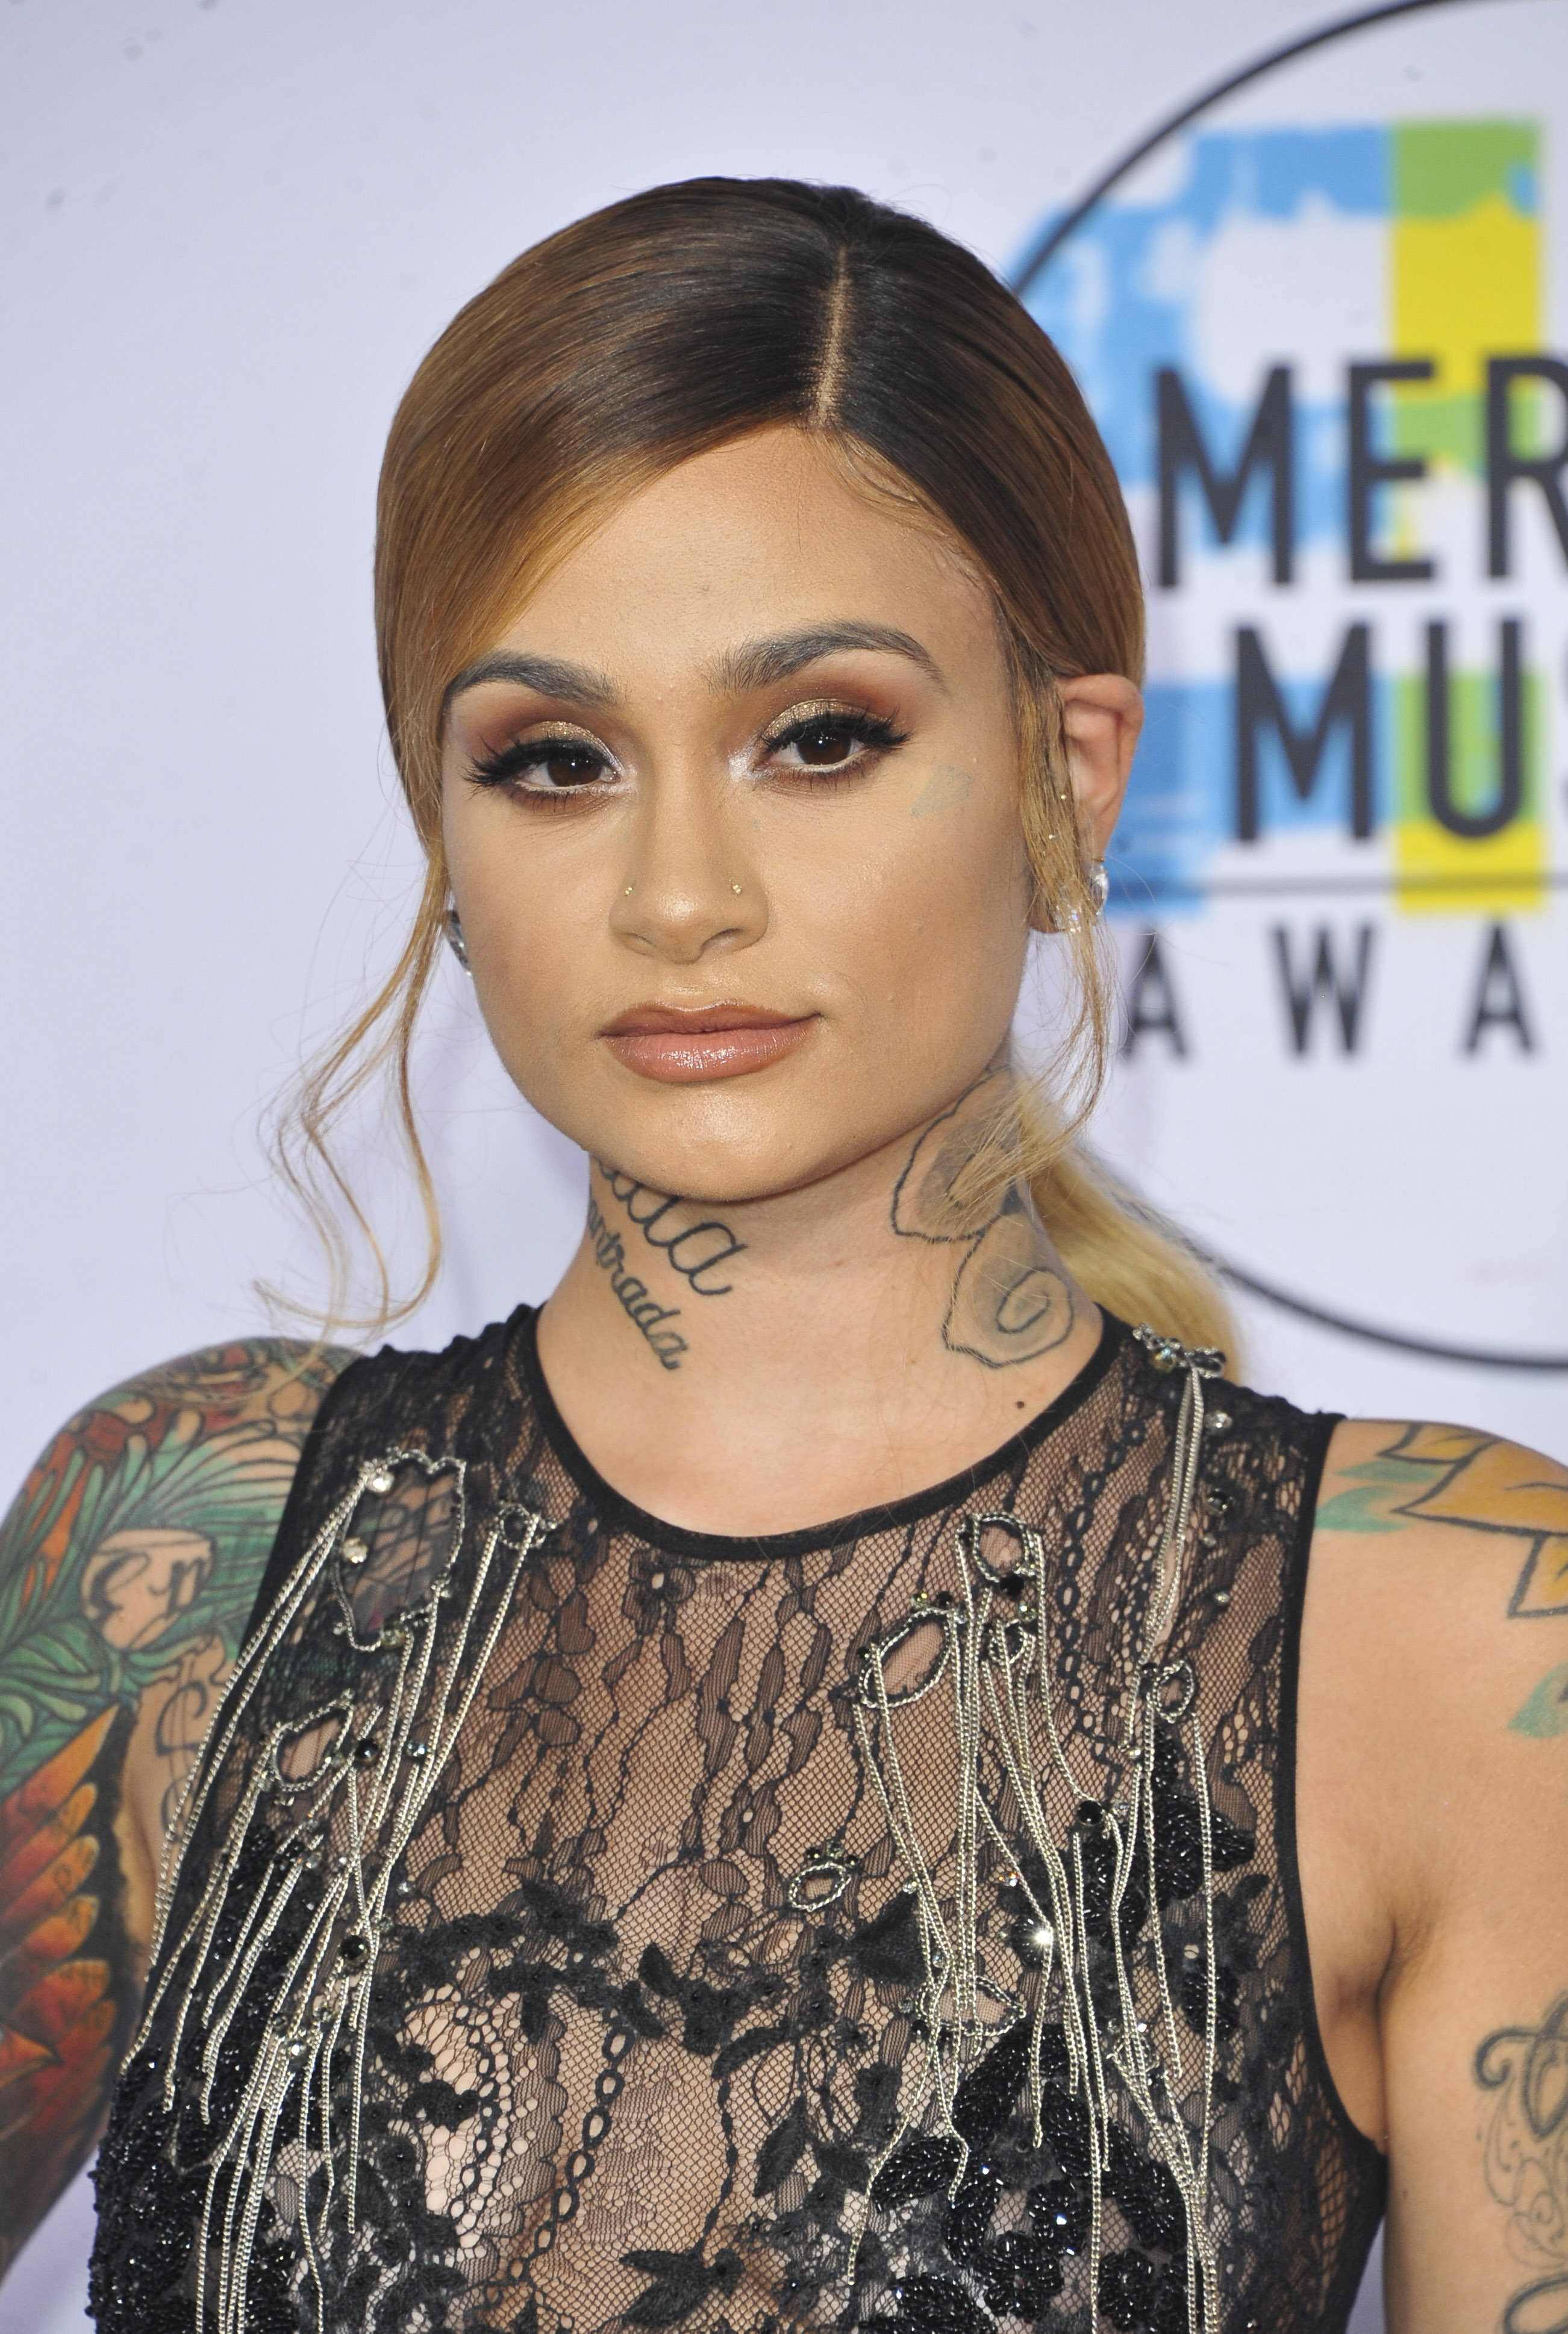 Kehlani Shares First Photos Of Her Daughter's Face